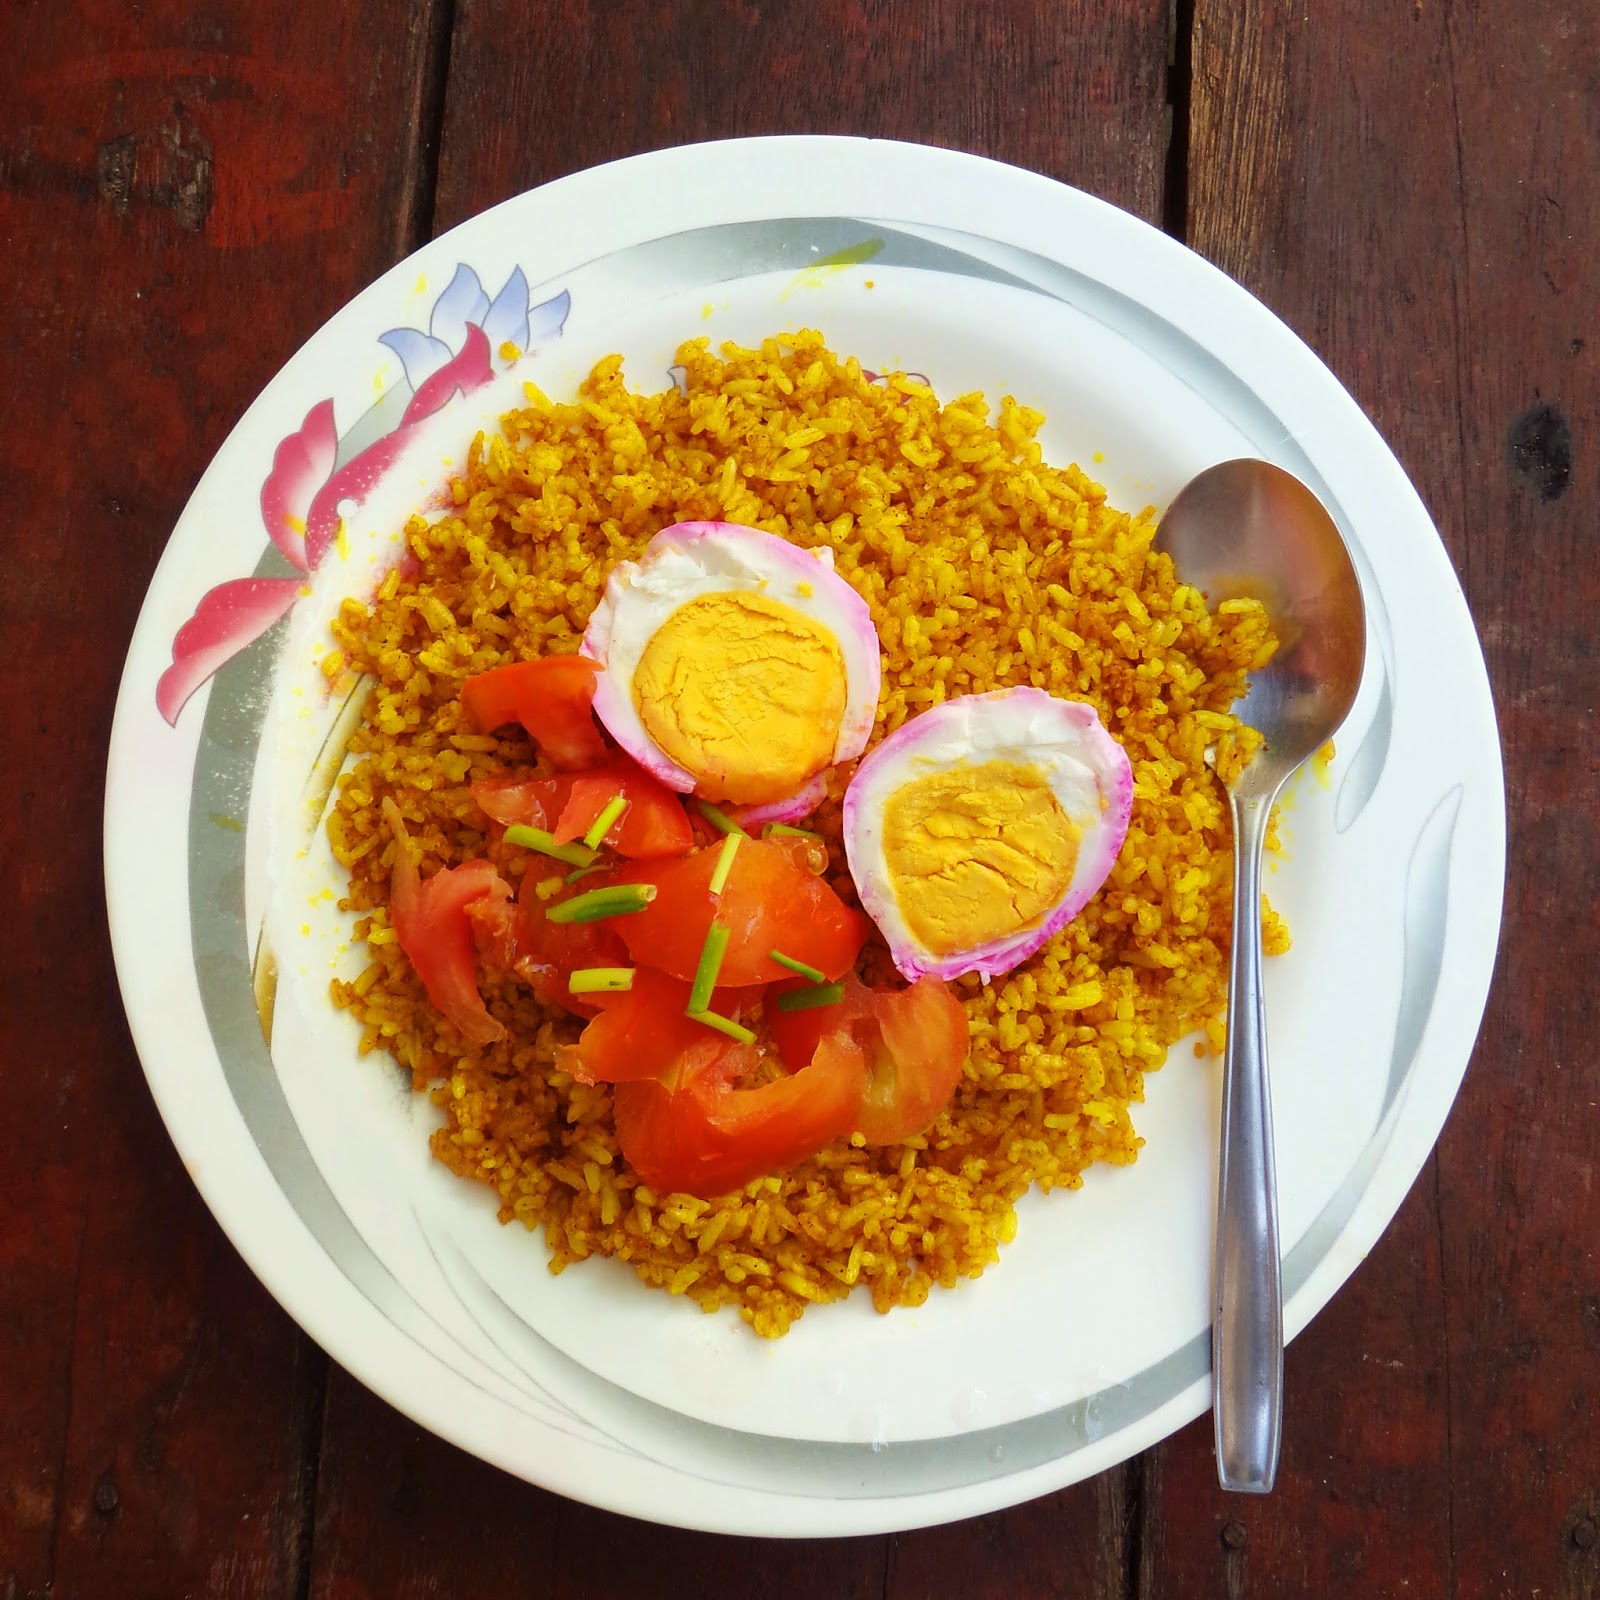 white rice, fried rice recipes, persian dishes, indian recipes, curry rice recipe, curry fried rice, curry recipe